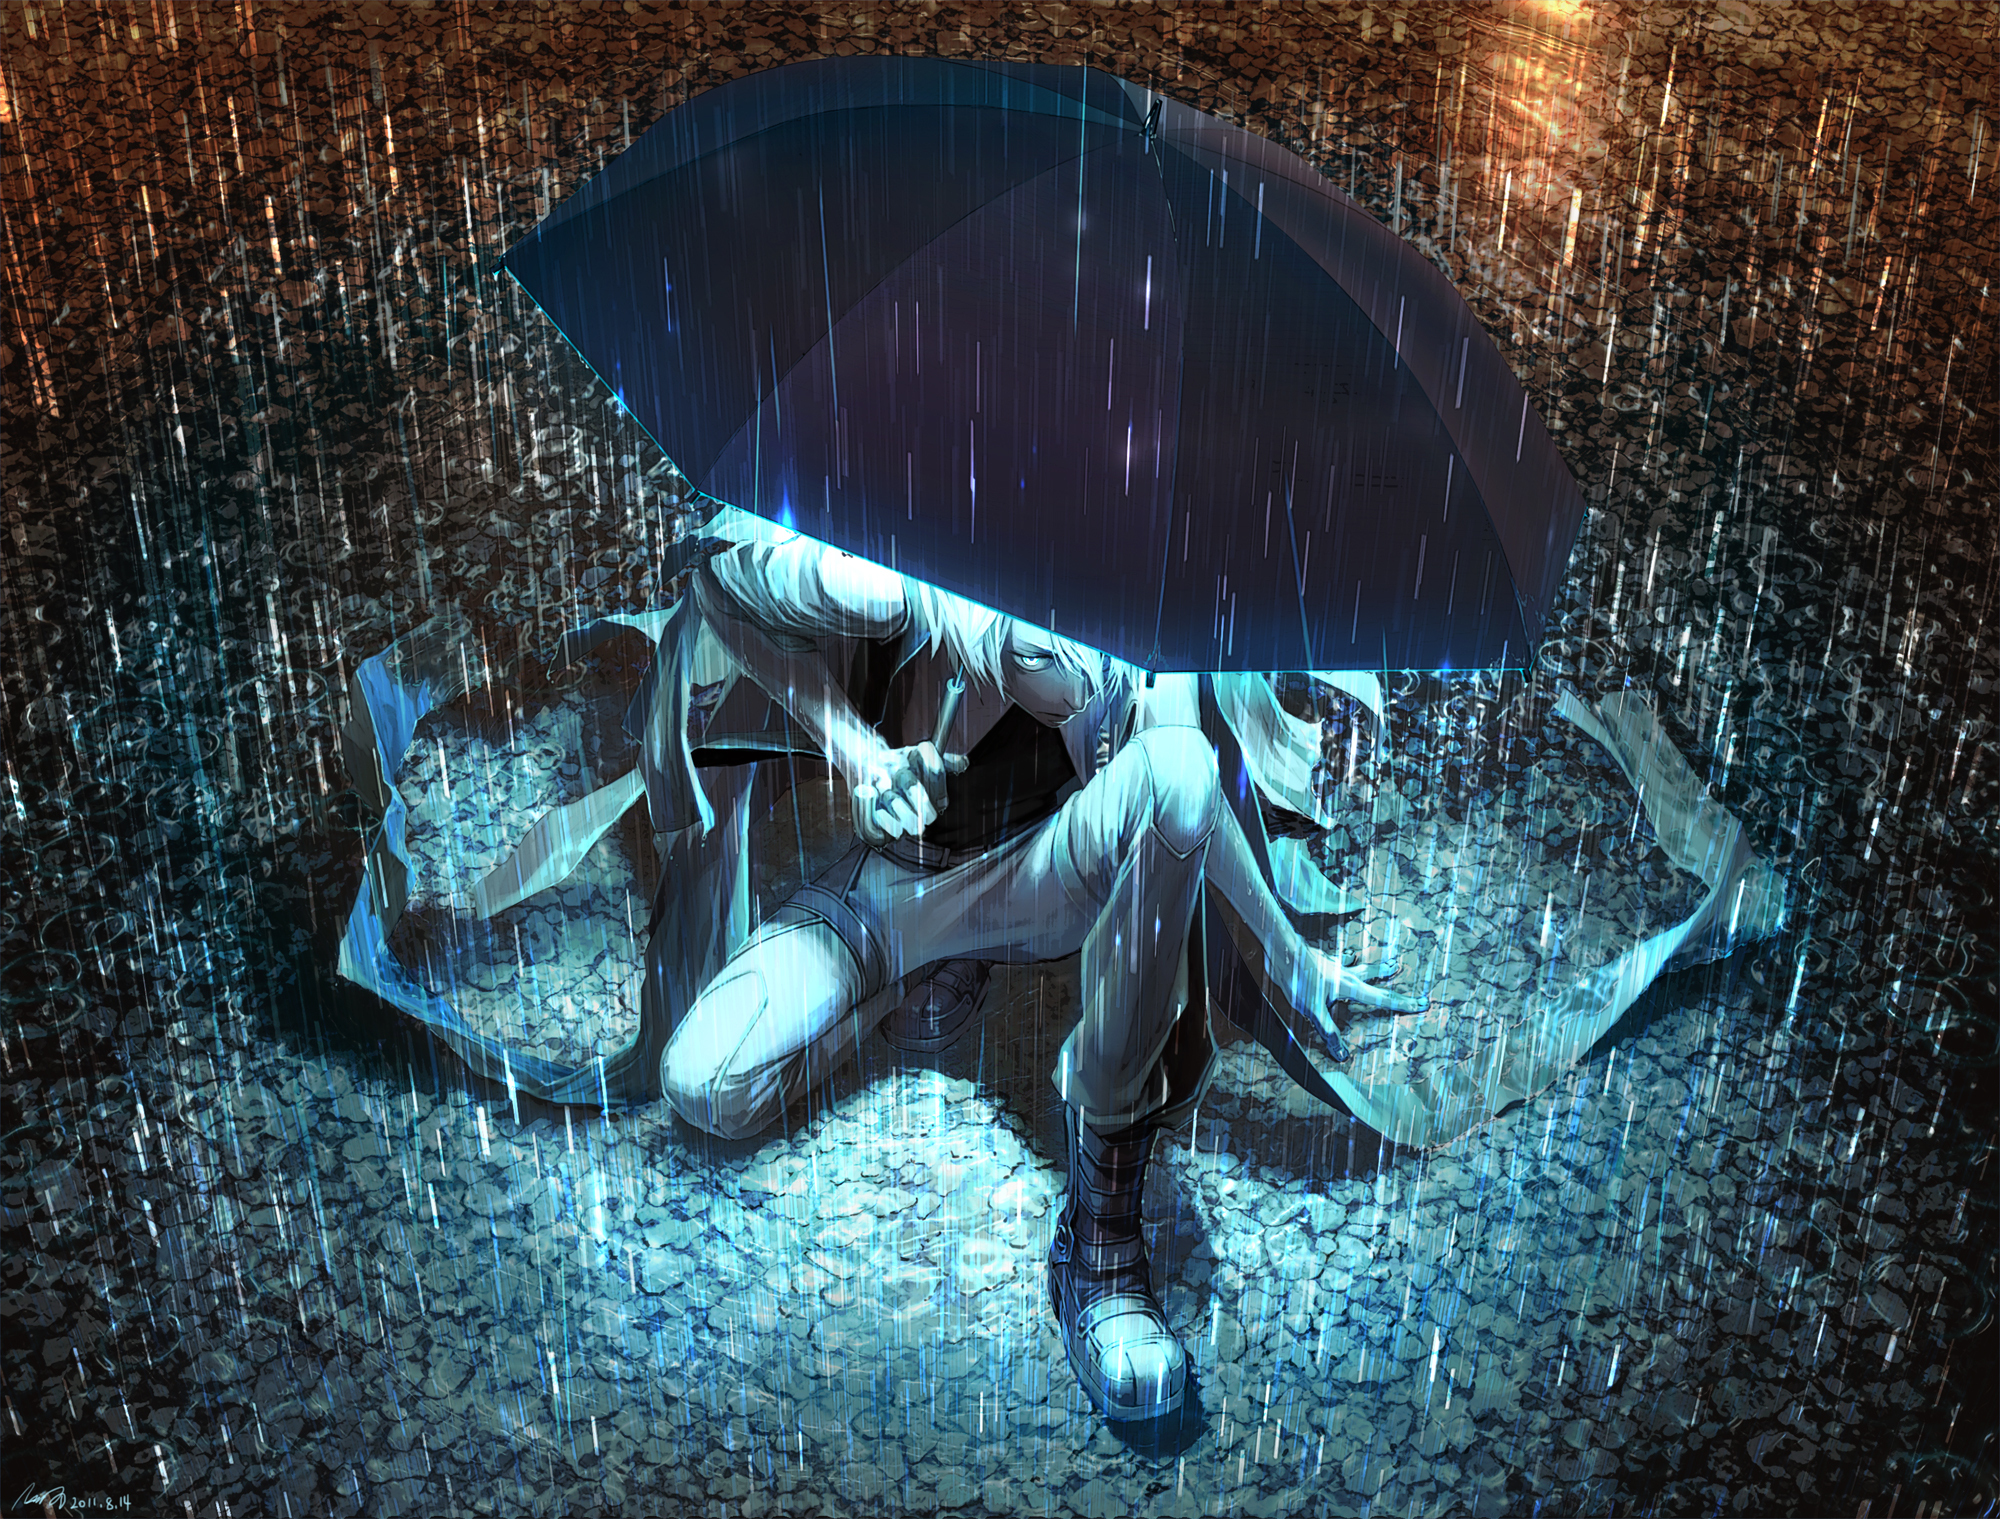 Anime character with umbrella in the rain